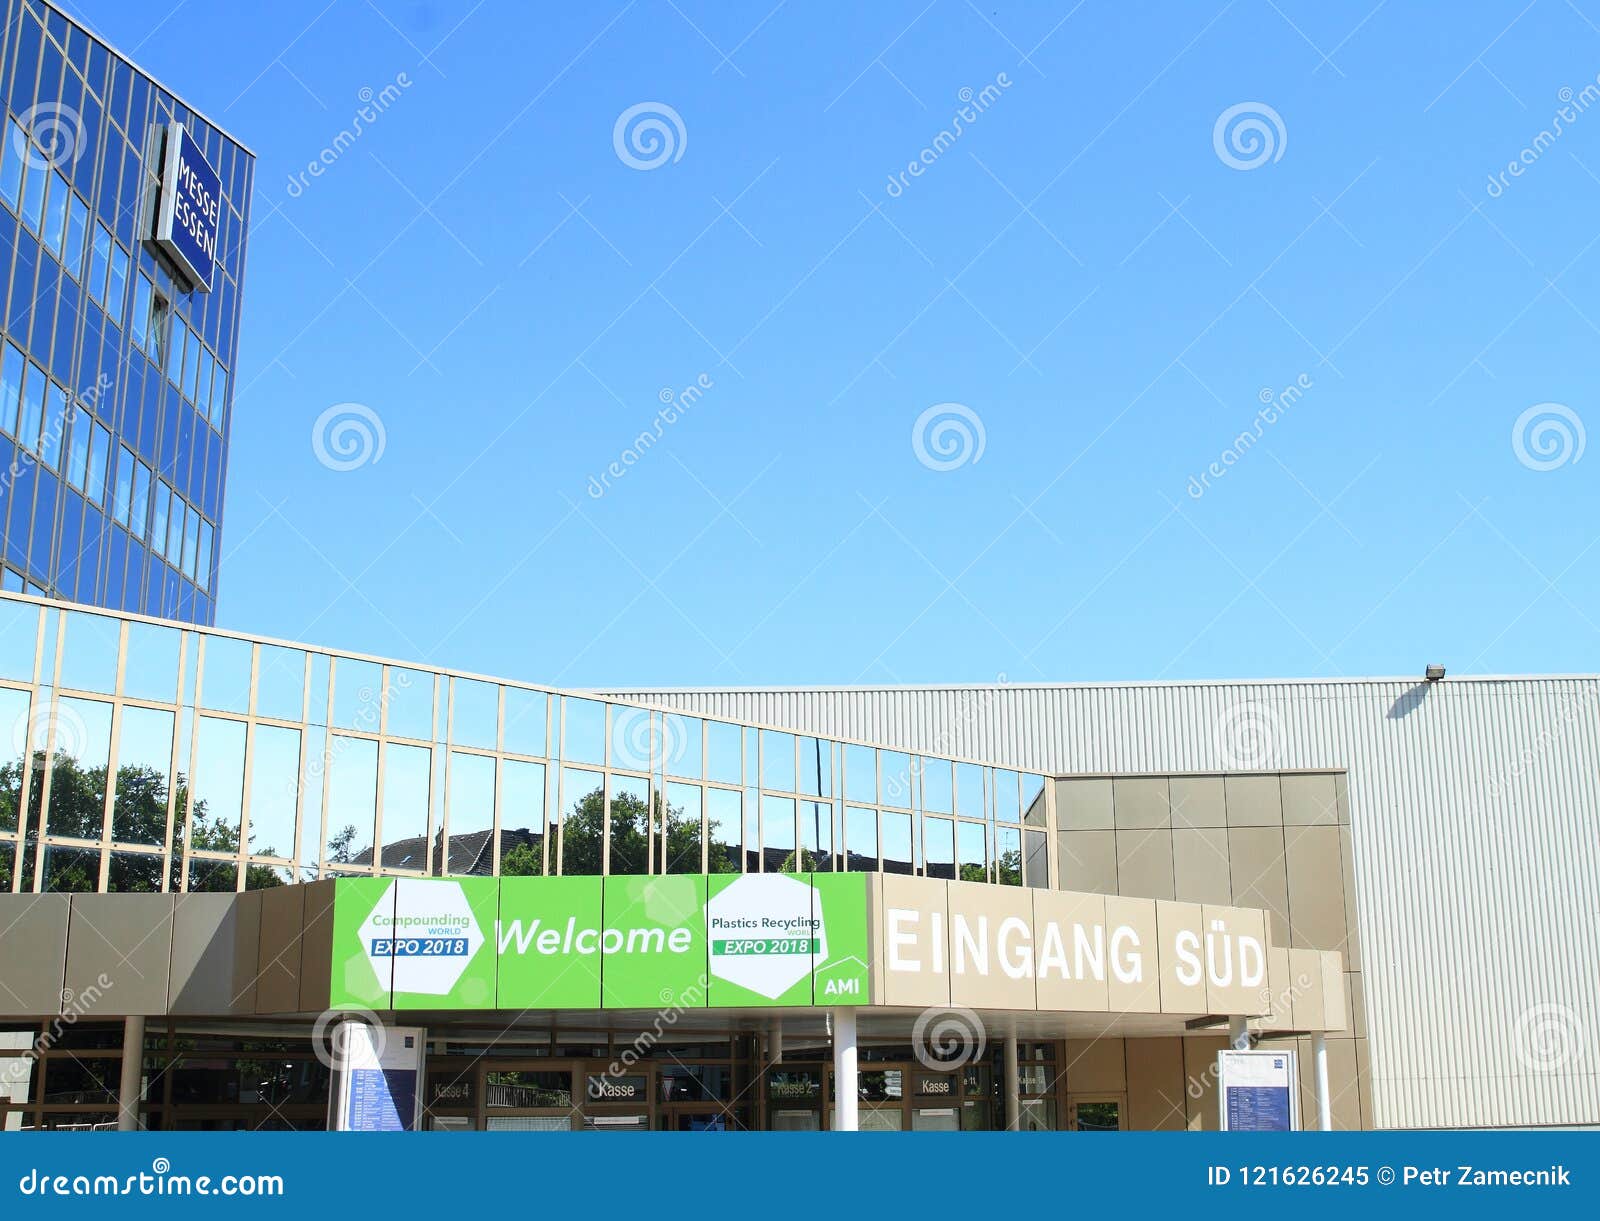 Entrance To Plastics Recycling World Exhibition Editorial Image Image